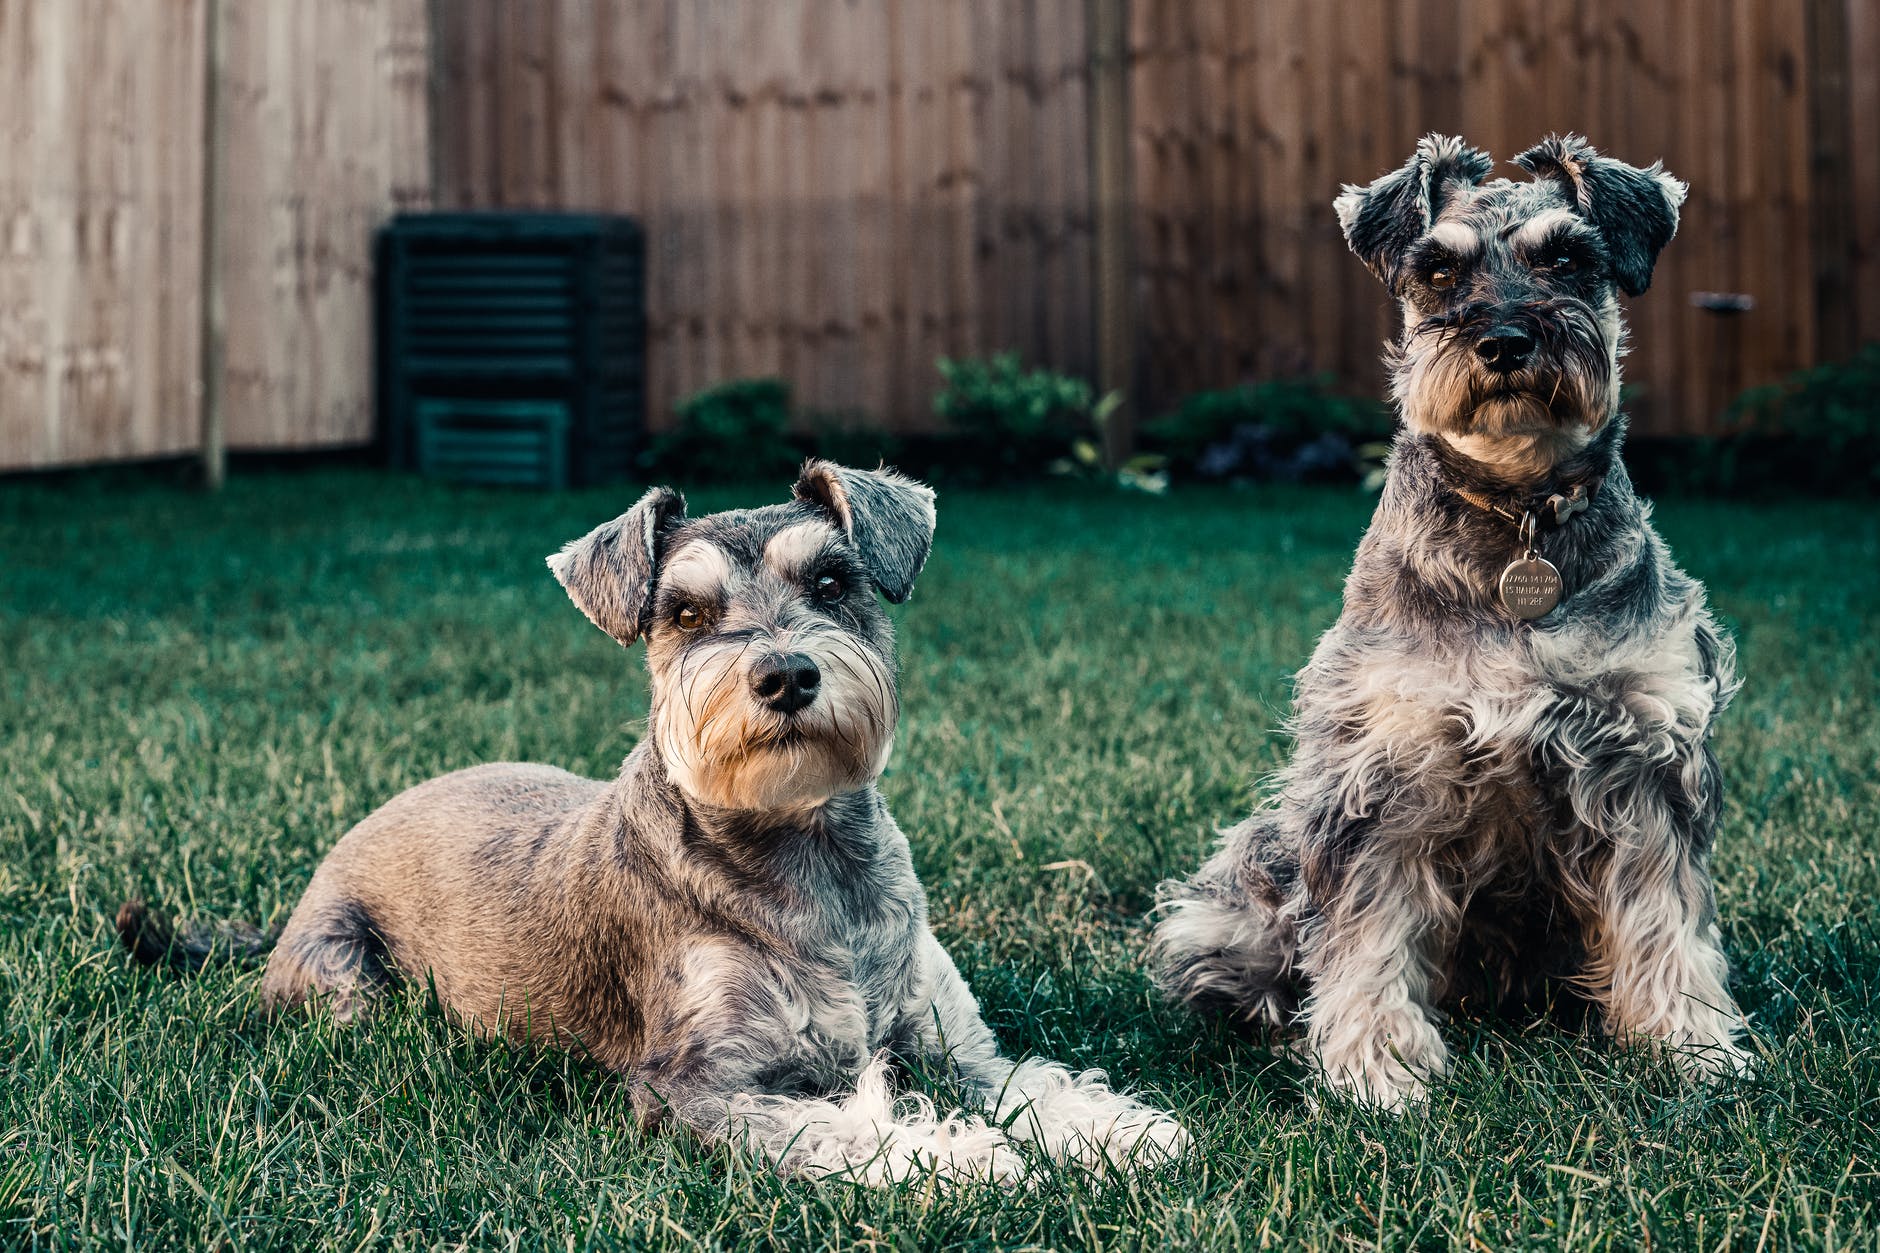 photo of dogs on grass